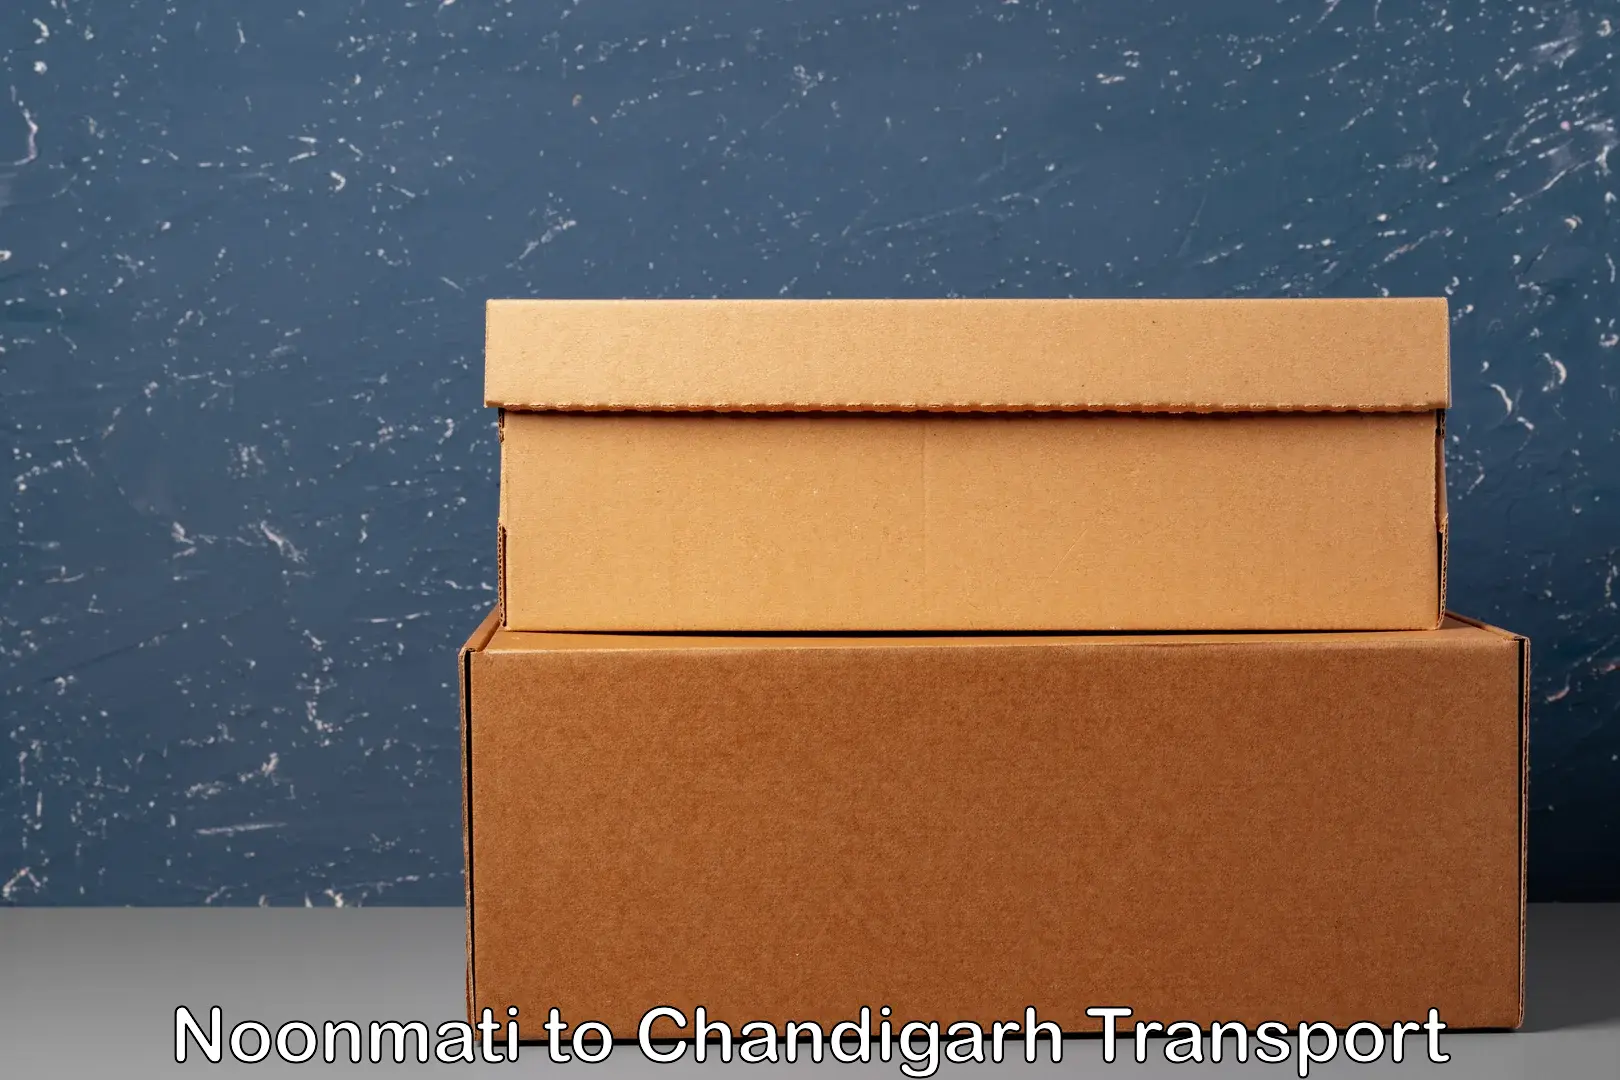 Container transportation services Noonmati to Chandigarh